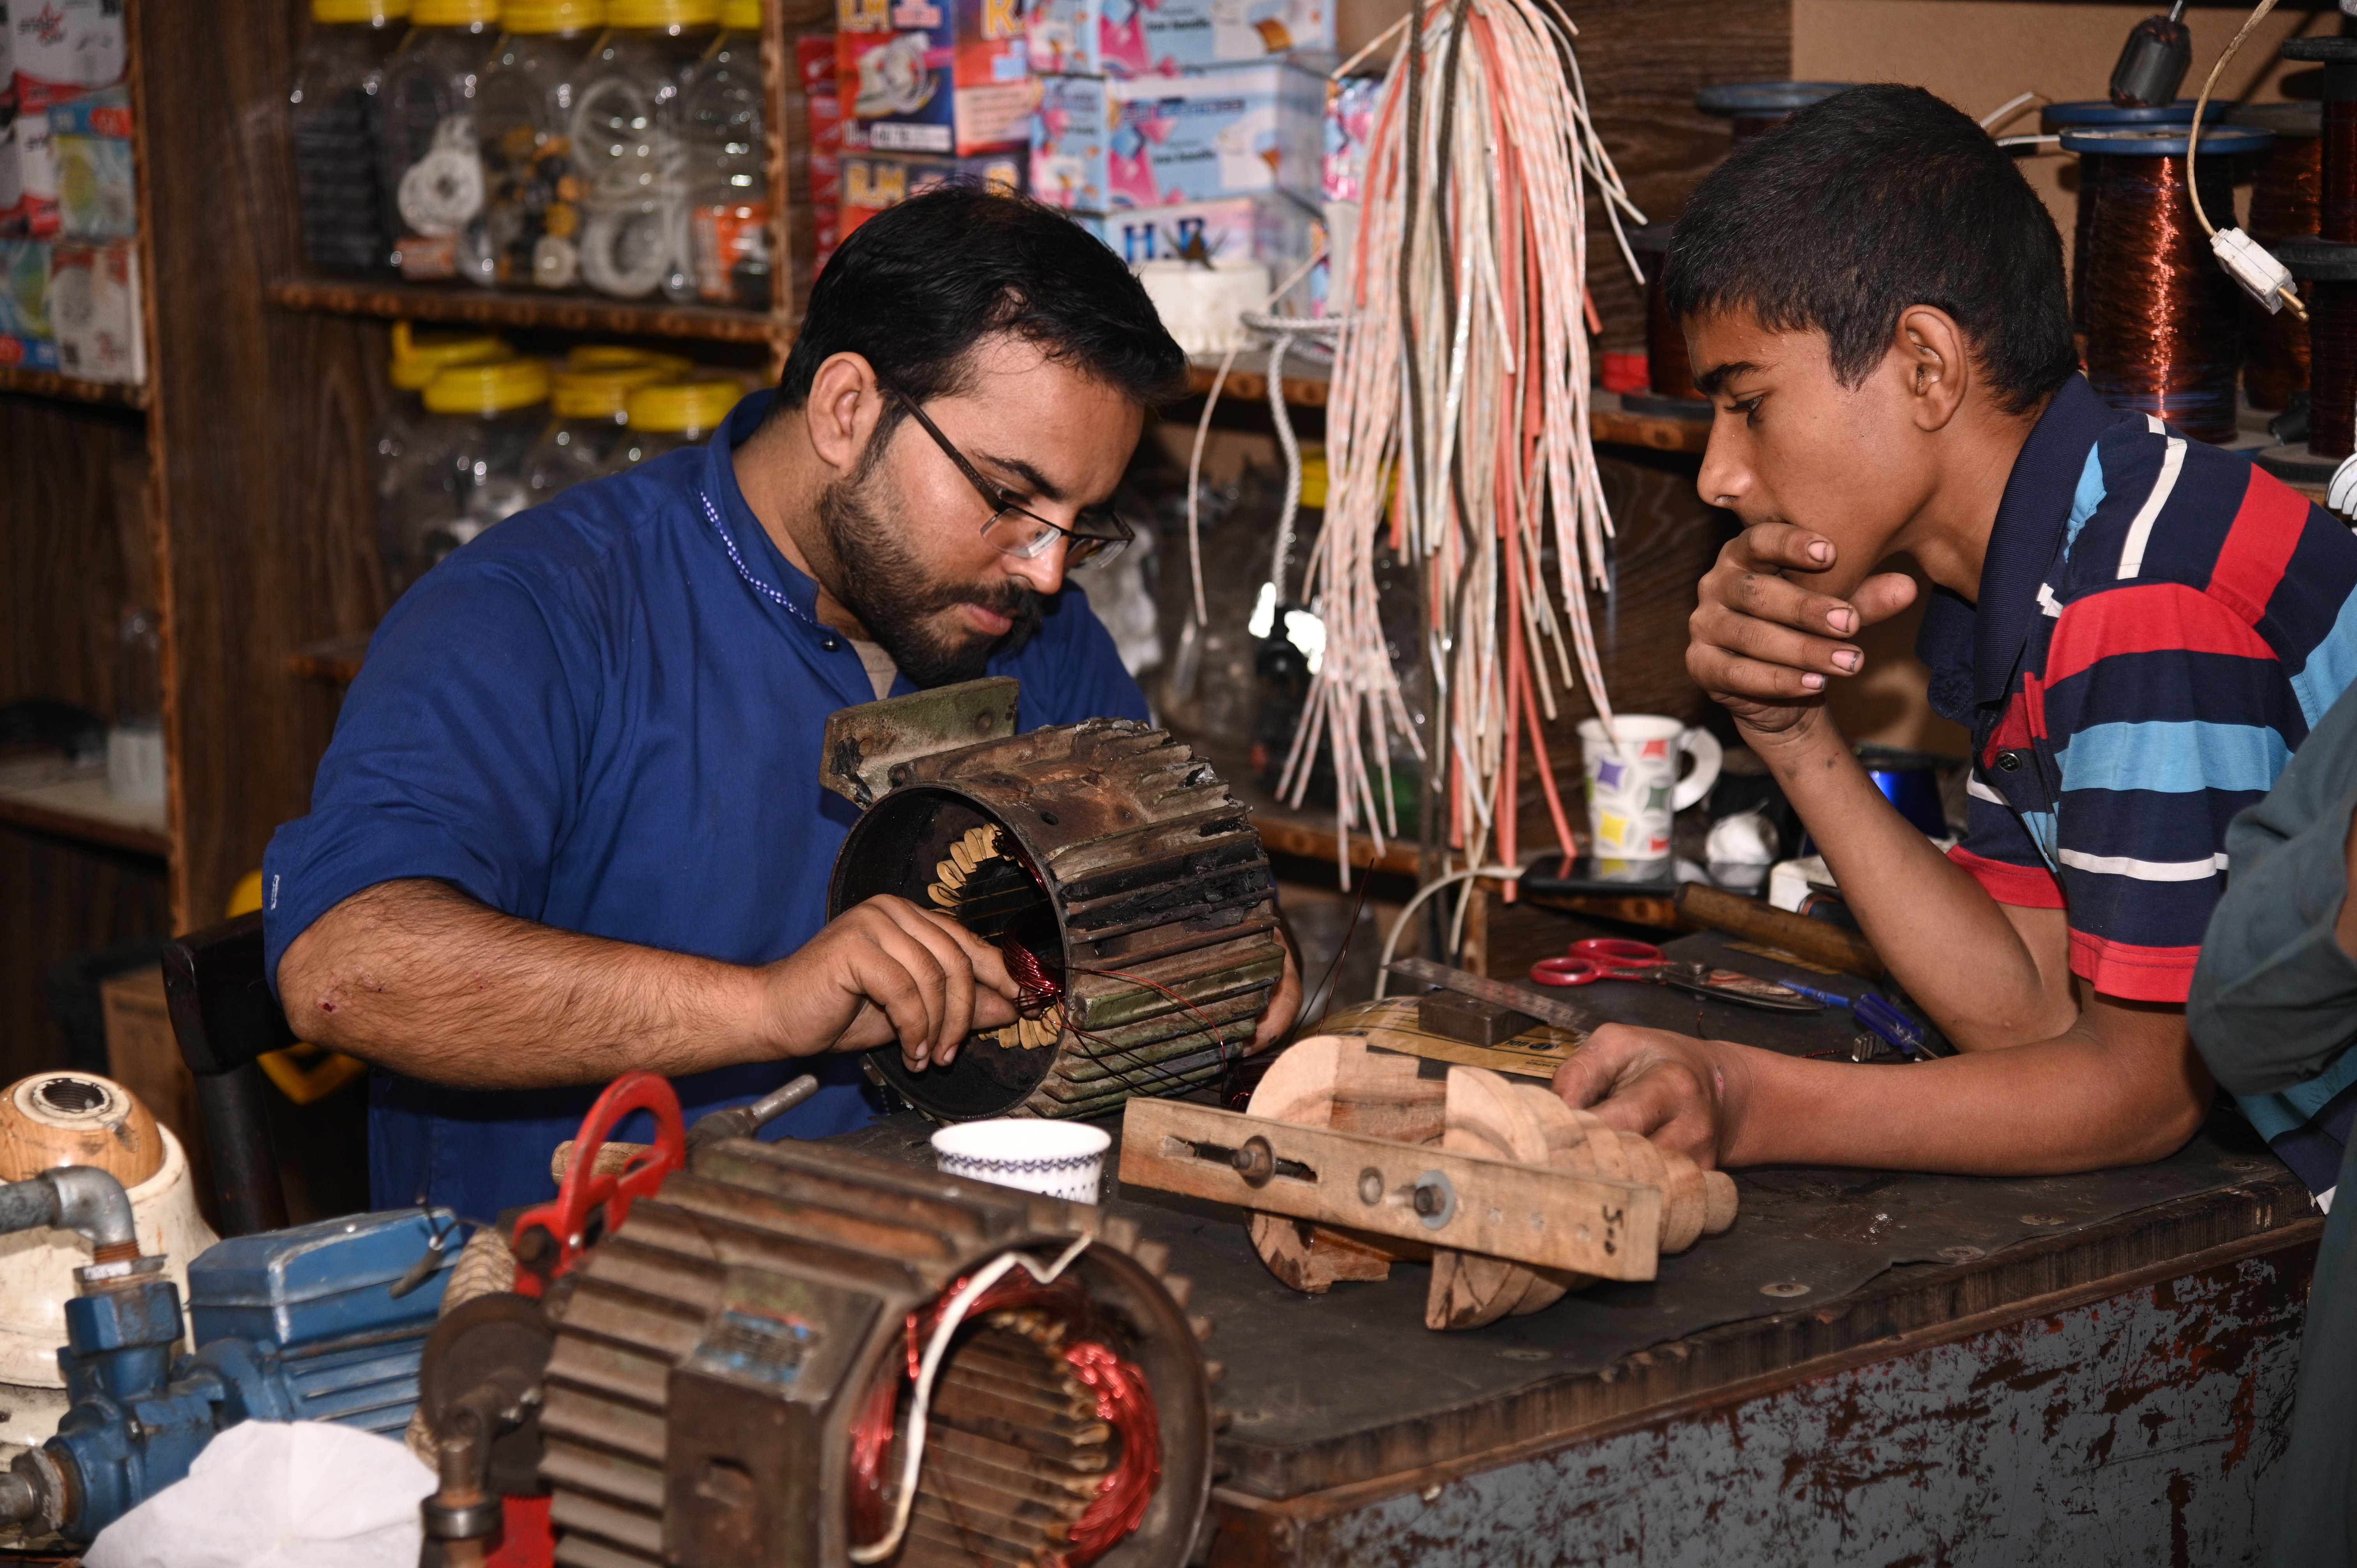 A man busy with his co-worker in fixing the electric motor